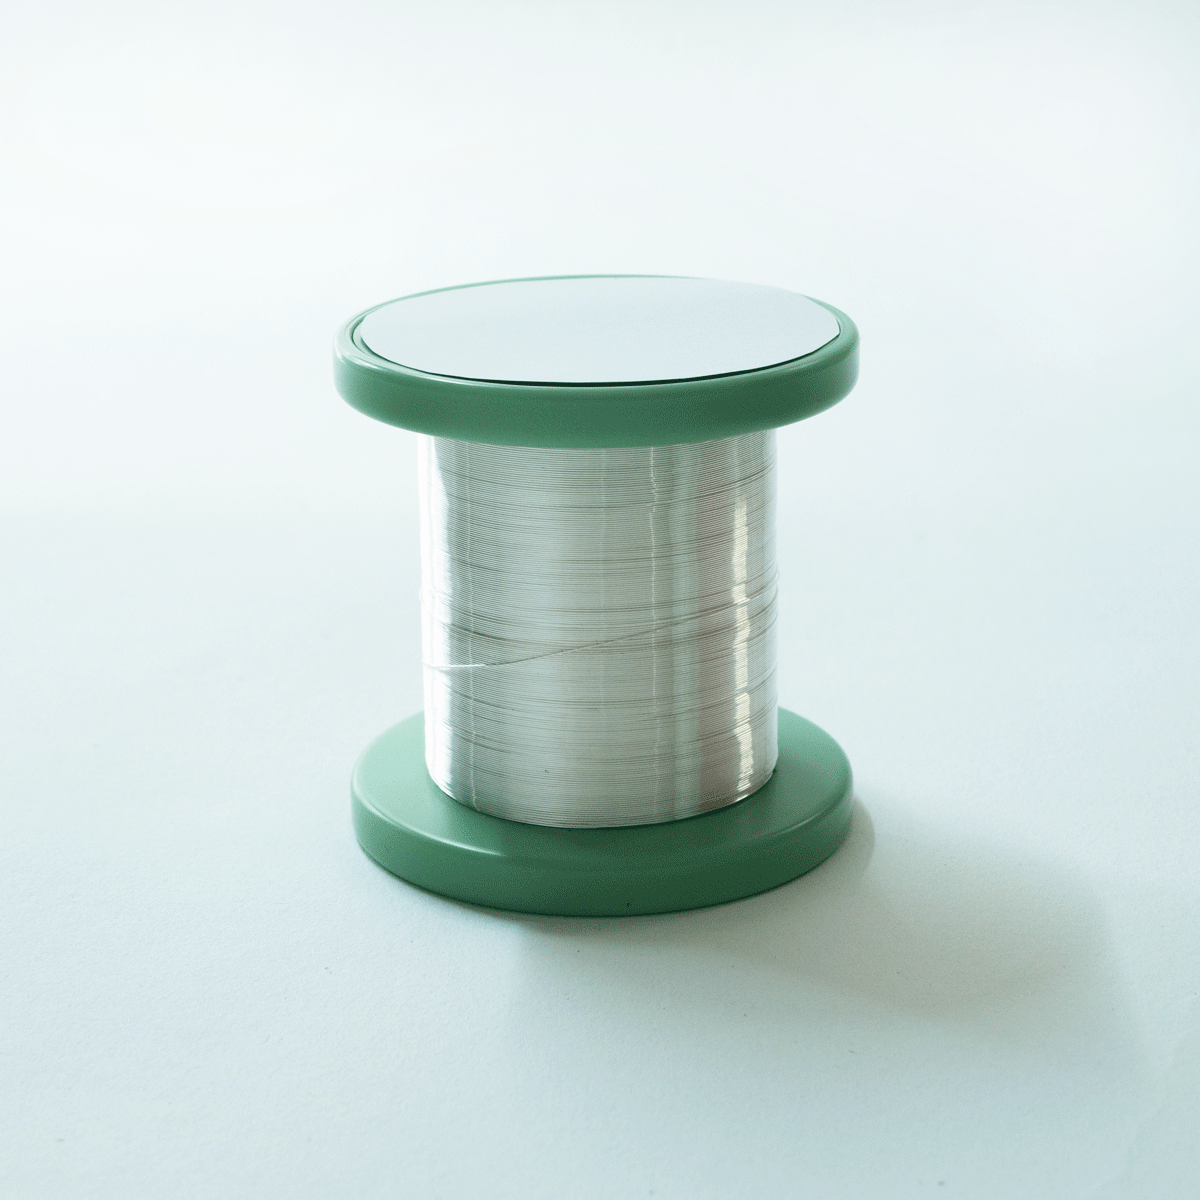 Copper nickel alloyed wire, silver plated - 0,25 mm